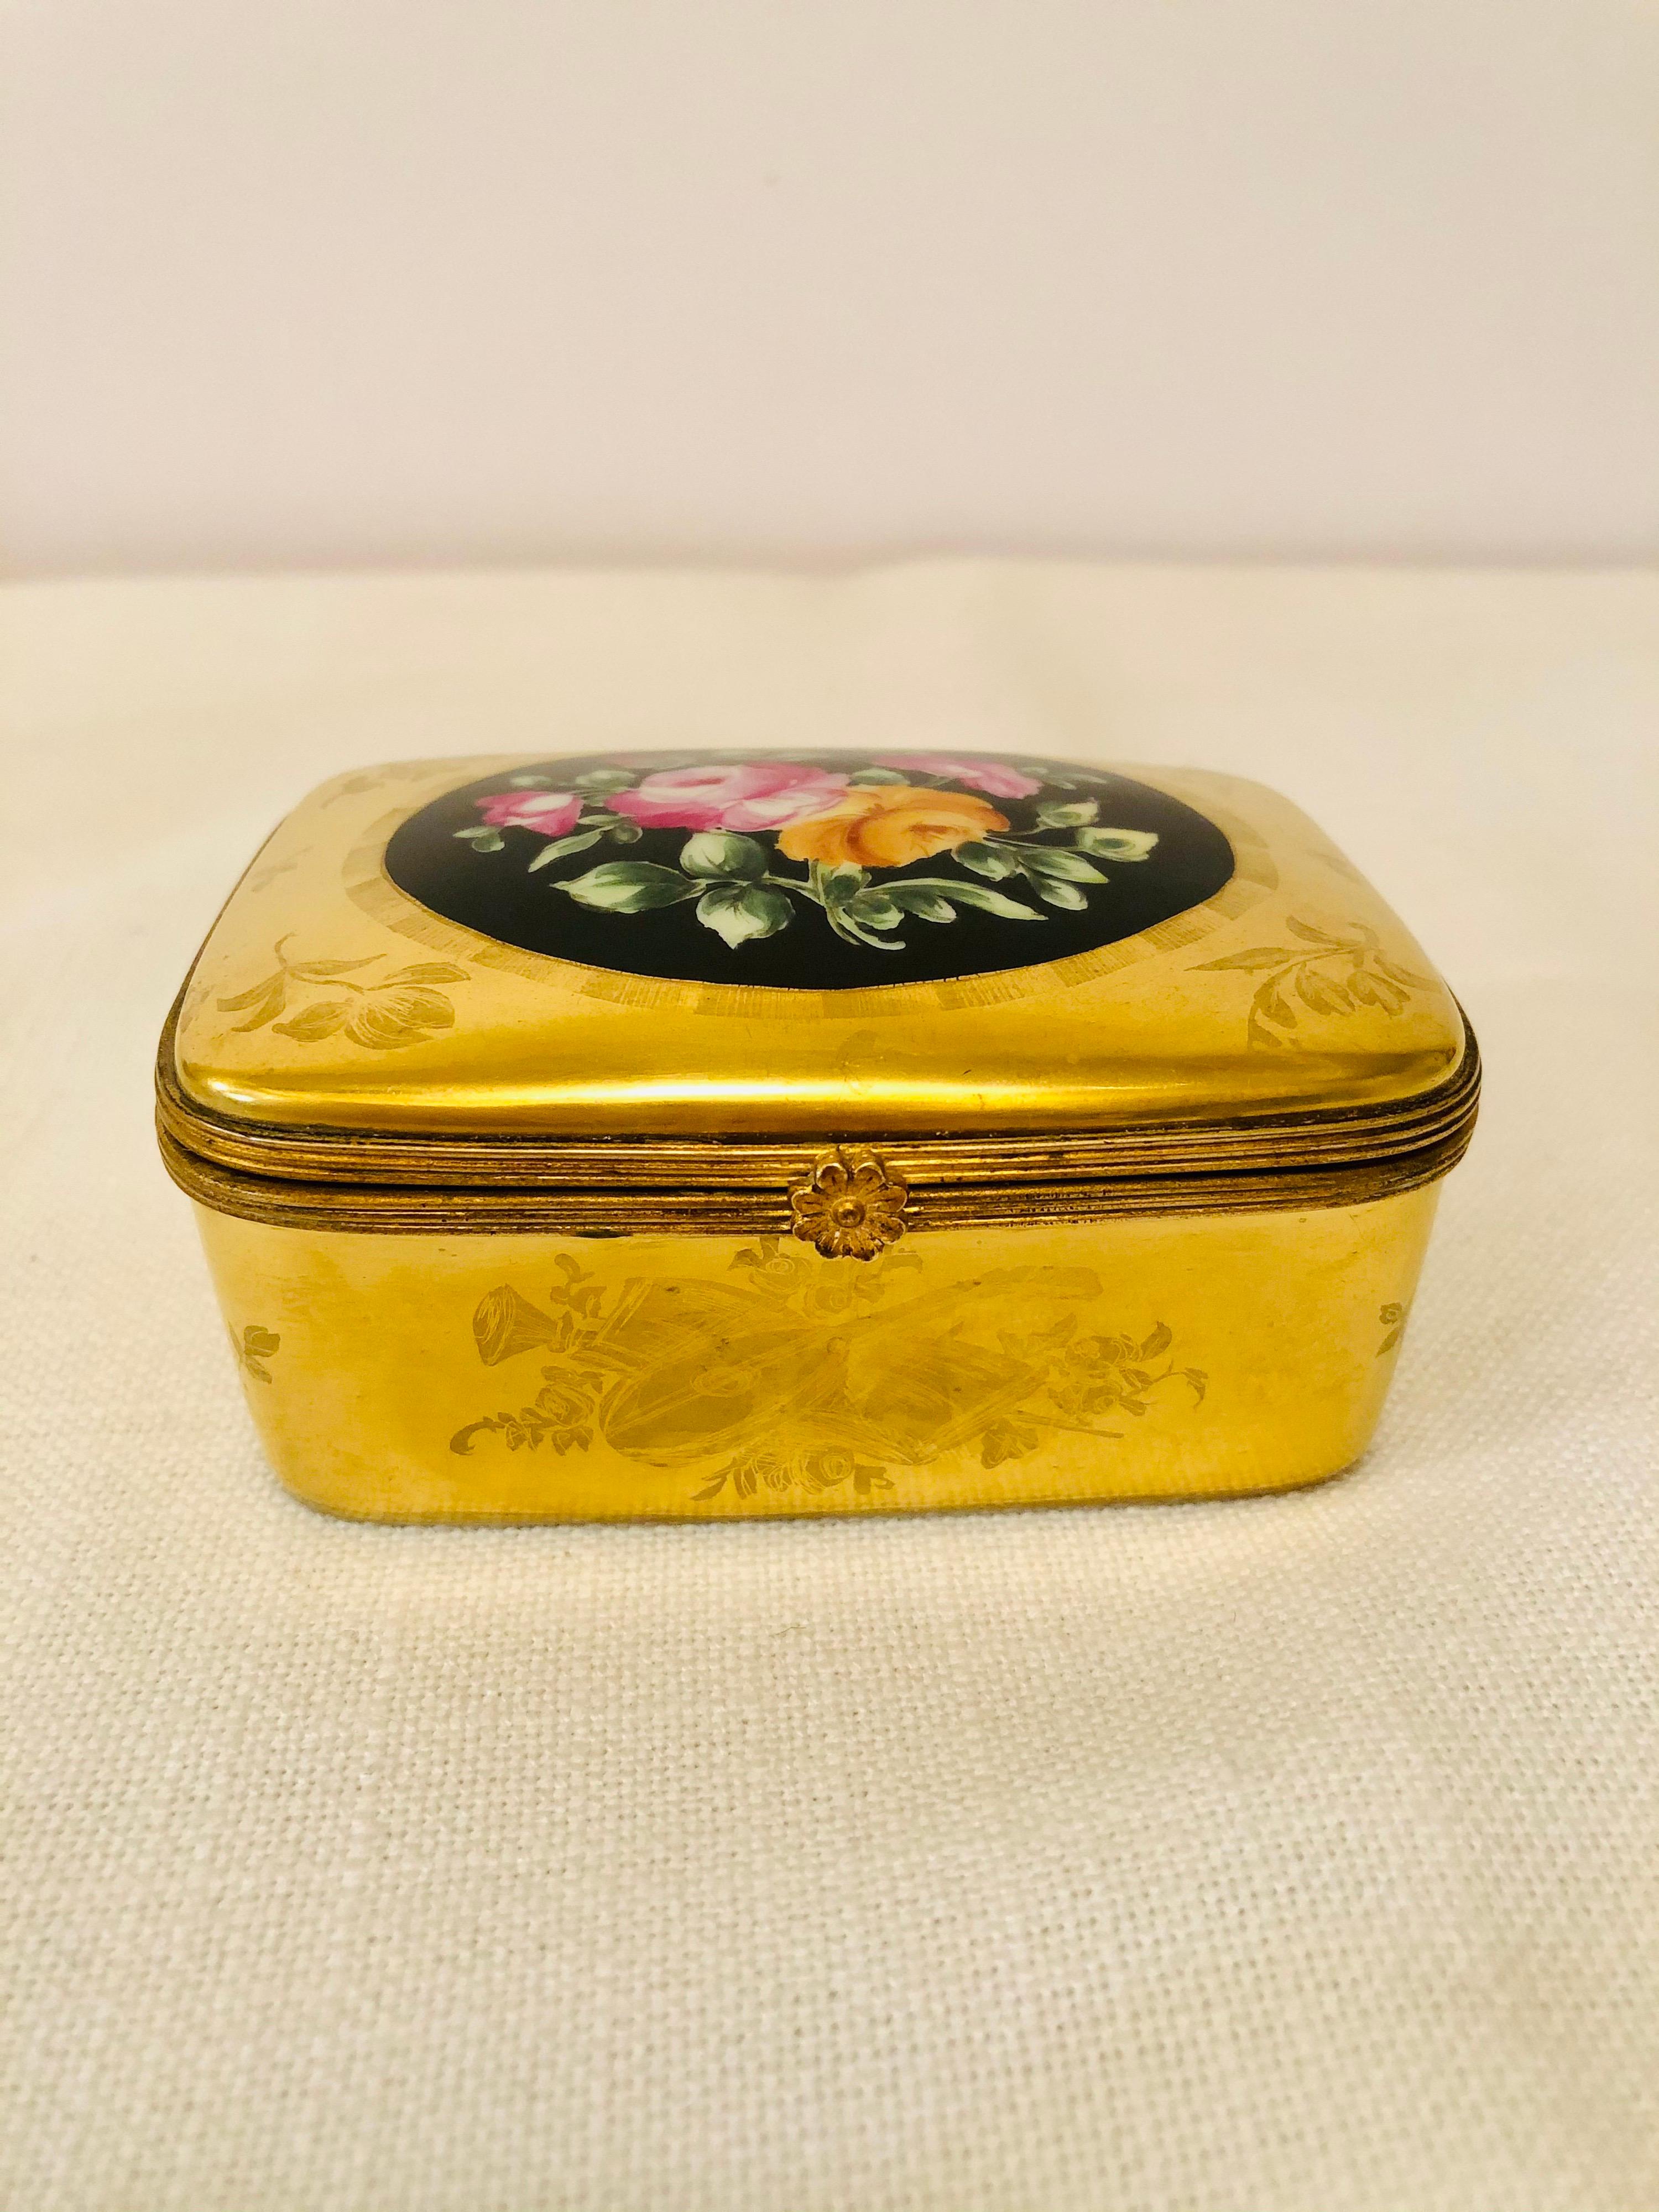 Porcelain Le Tallec Box with a Gold BackGround and a Central Painting of a Flower Bouquet